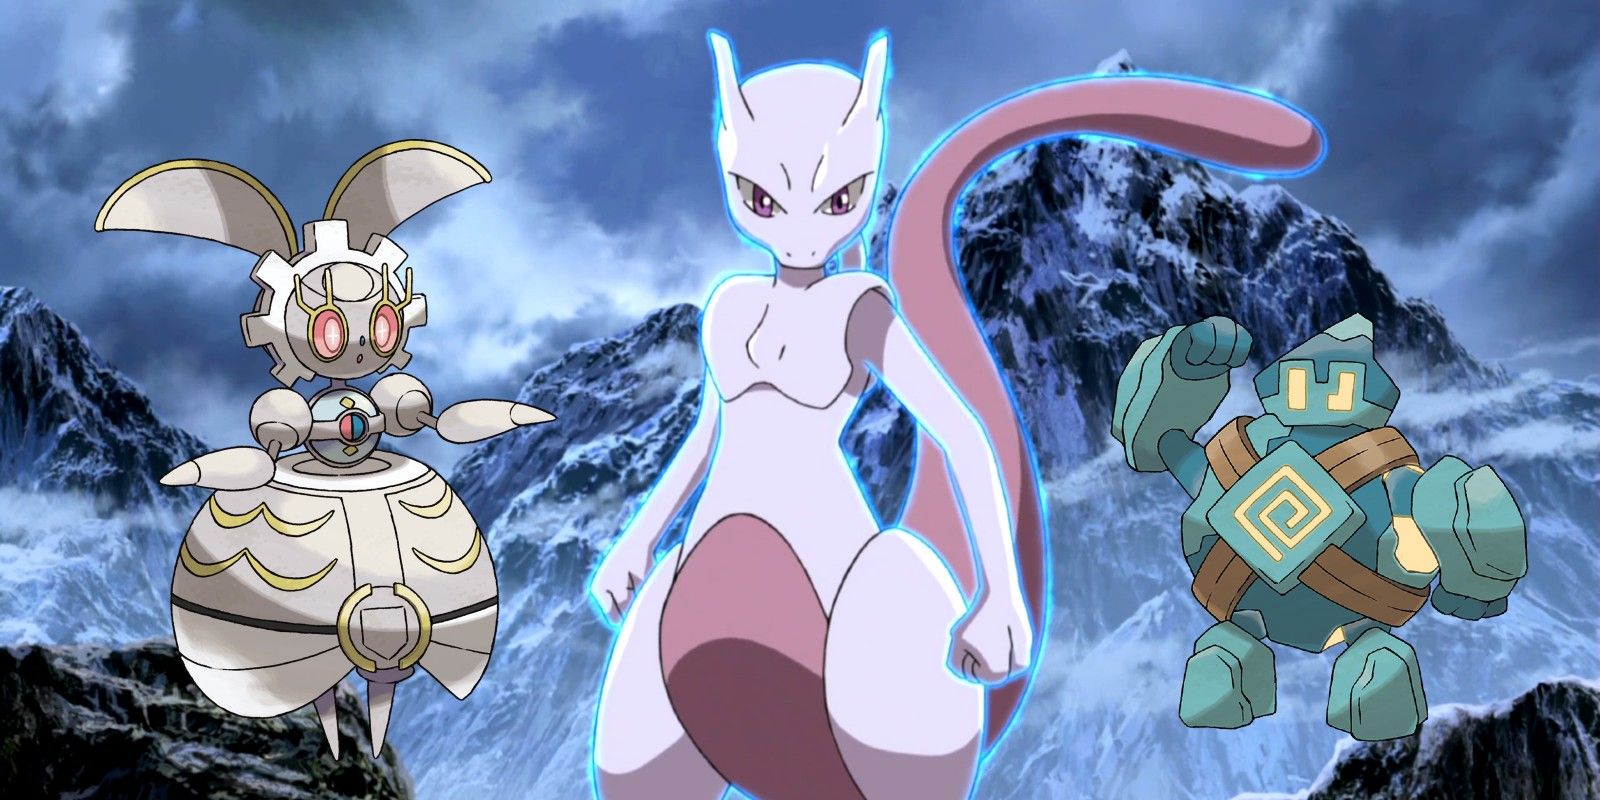 Mewtwo from the Pokémon anime, bordered by images of Magearna and Golett.